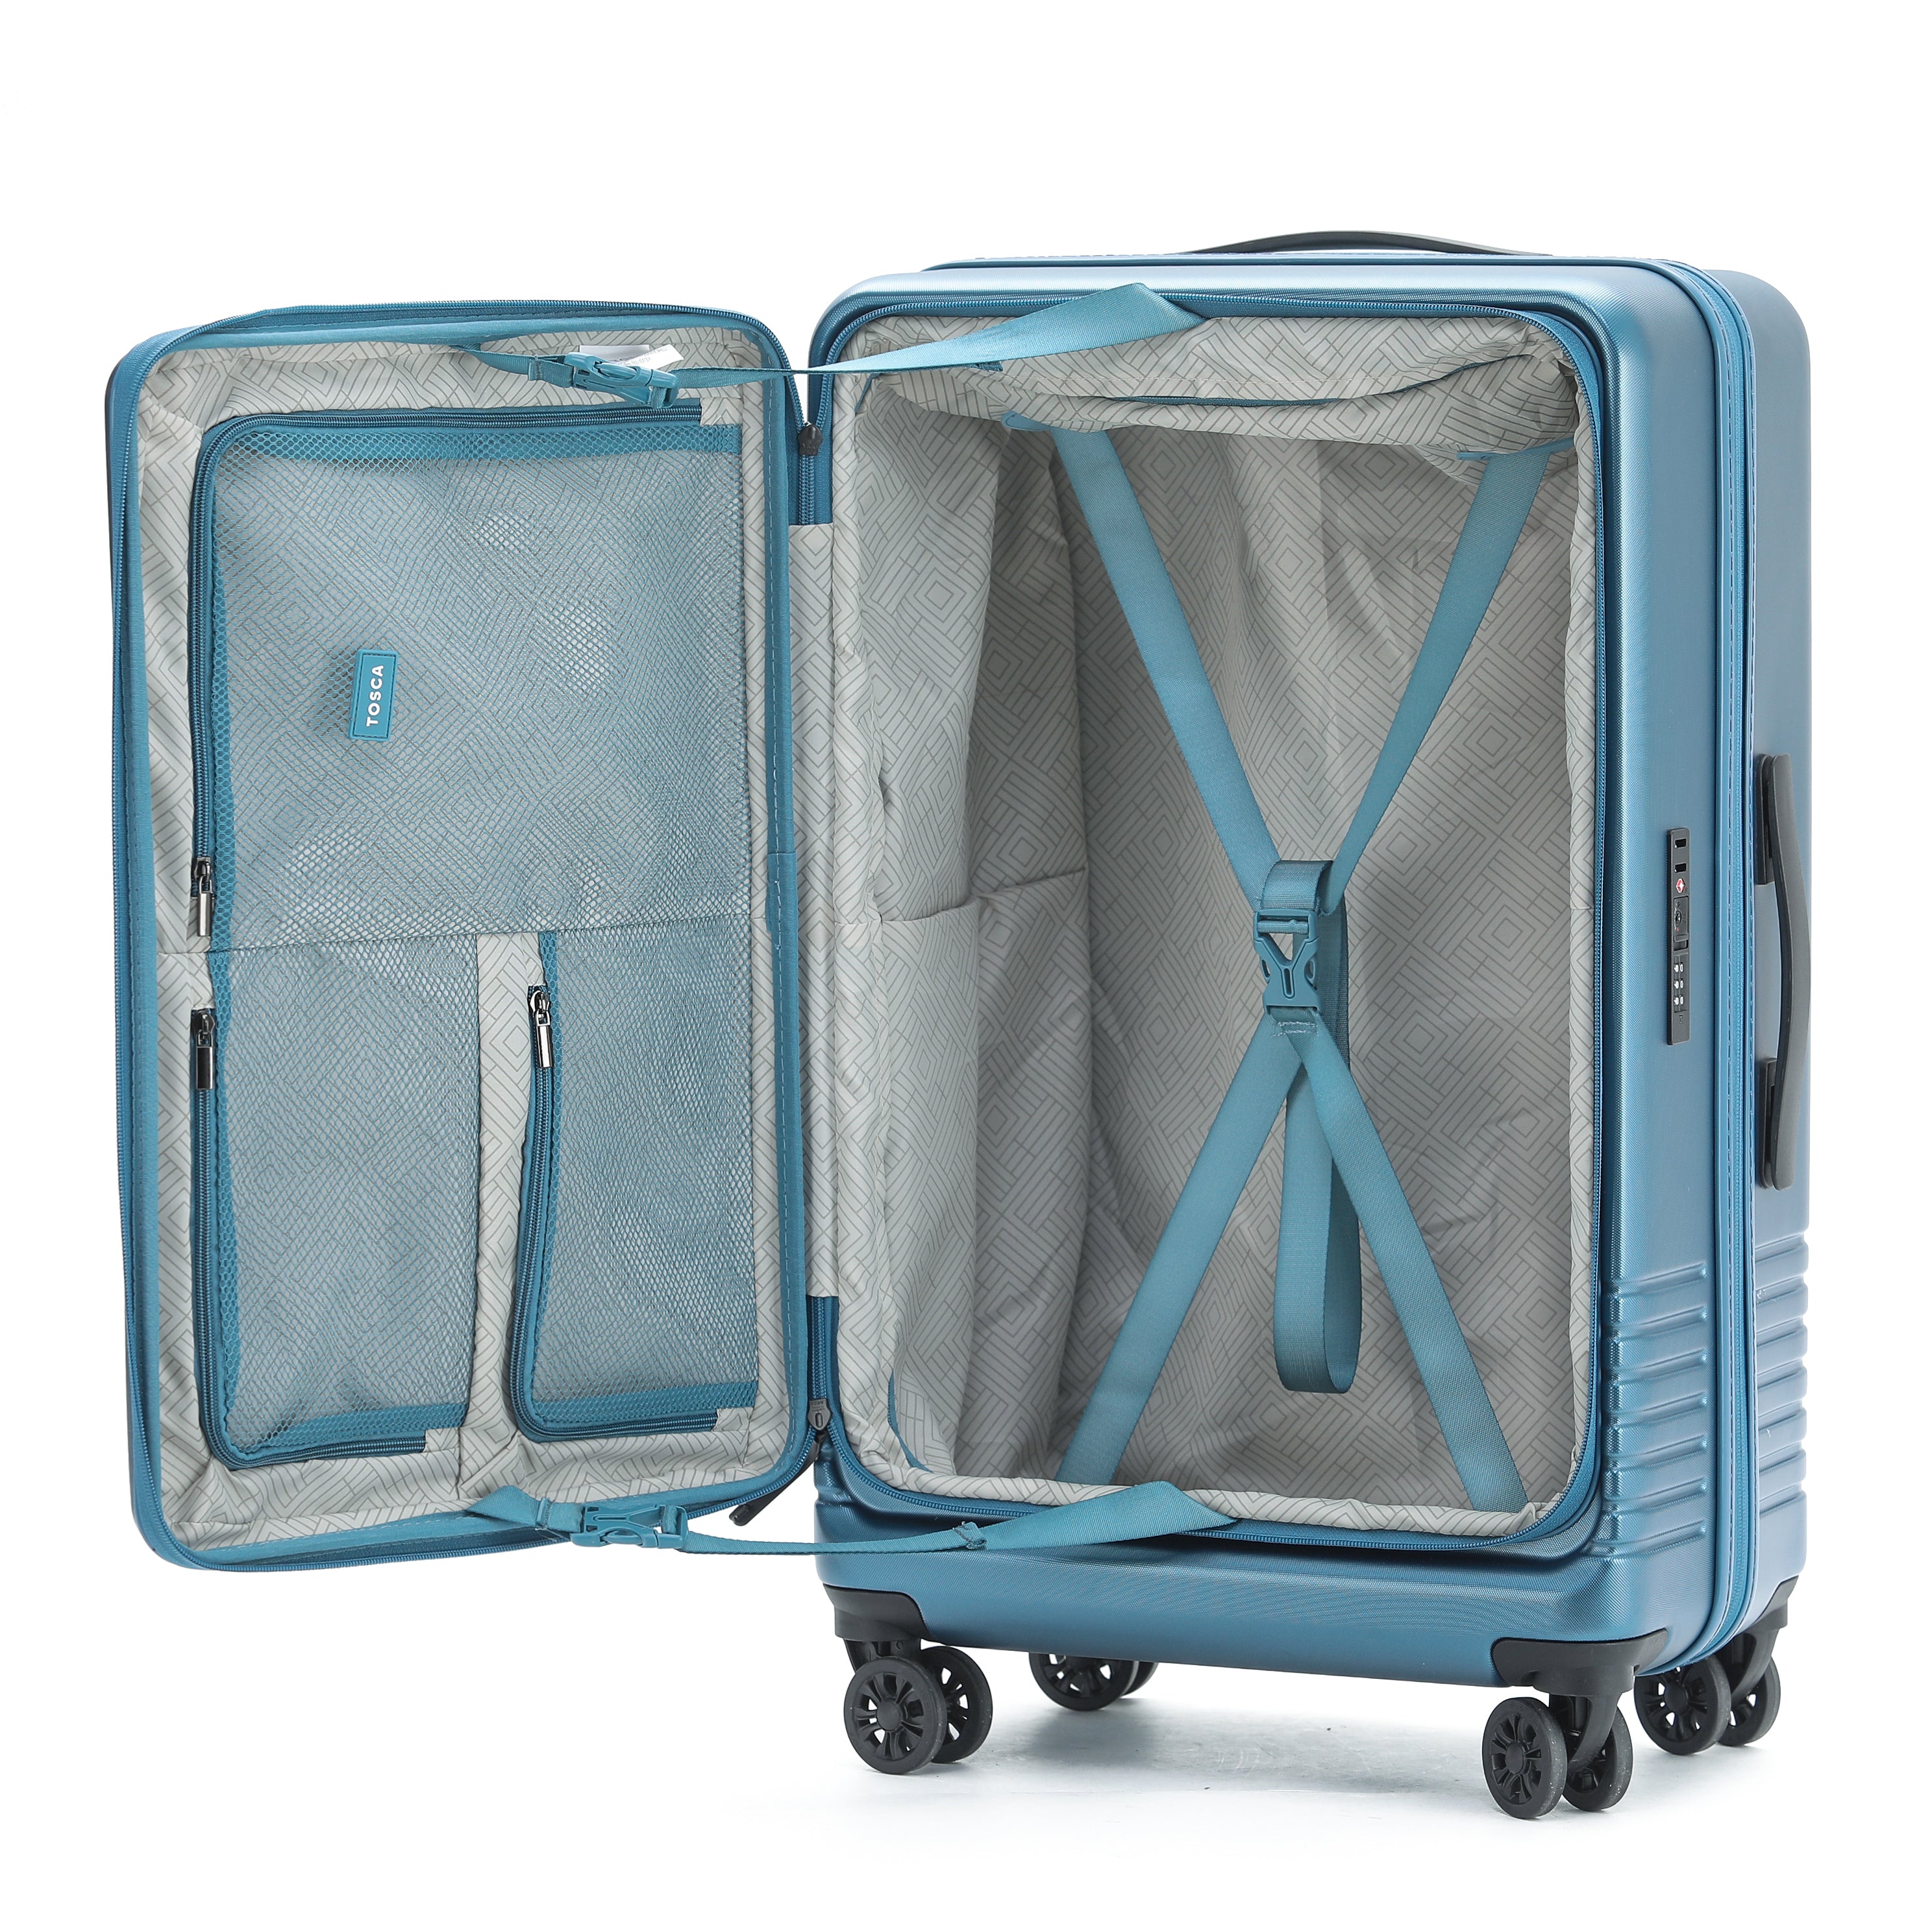 Tosca - TCA644 Horizon Front lid opening Set of 3 suitcases - Blue-13